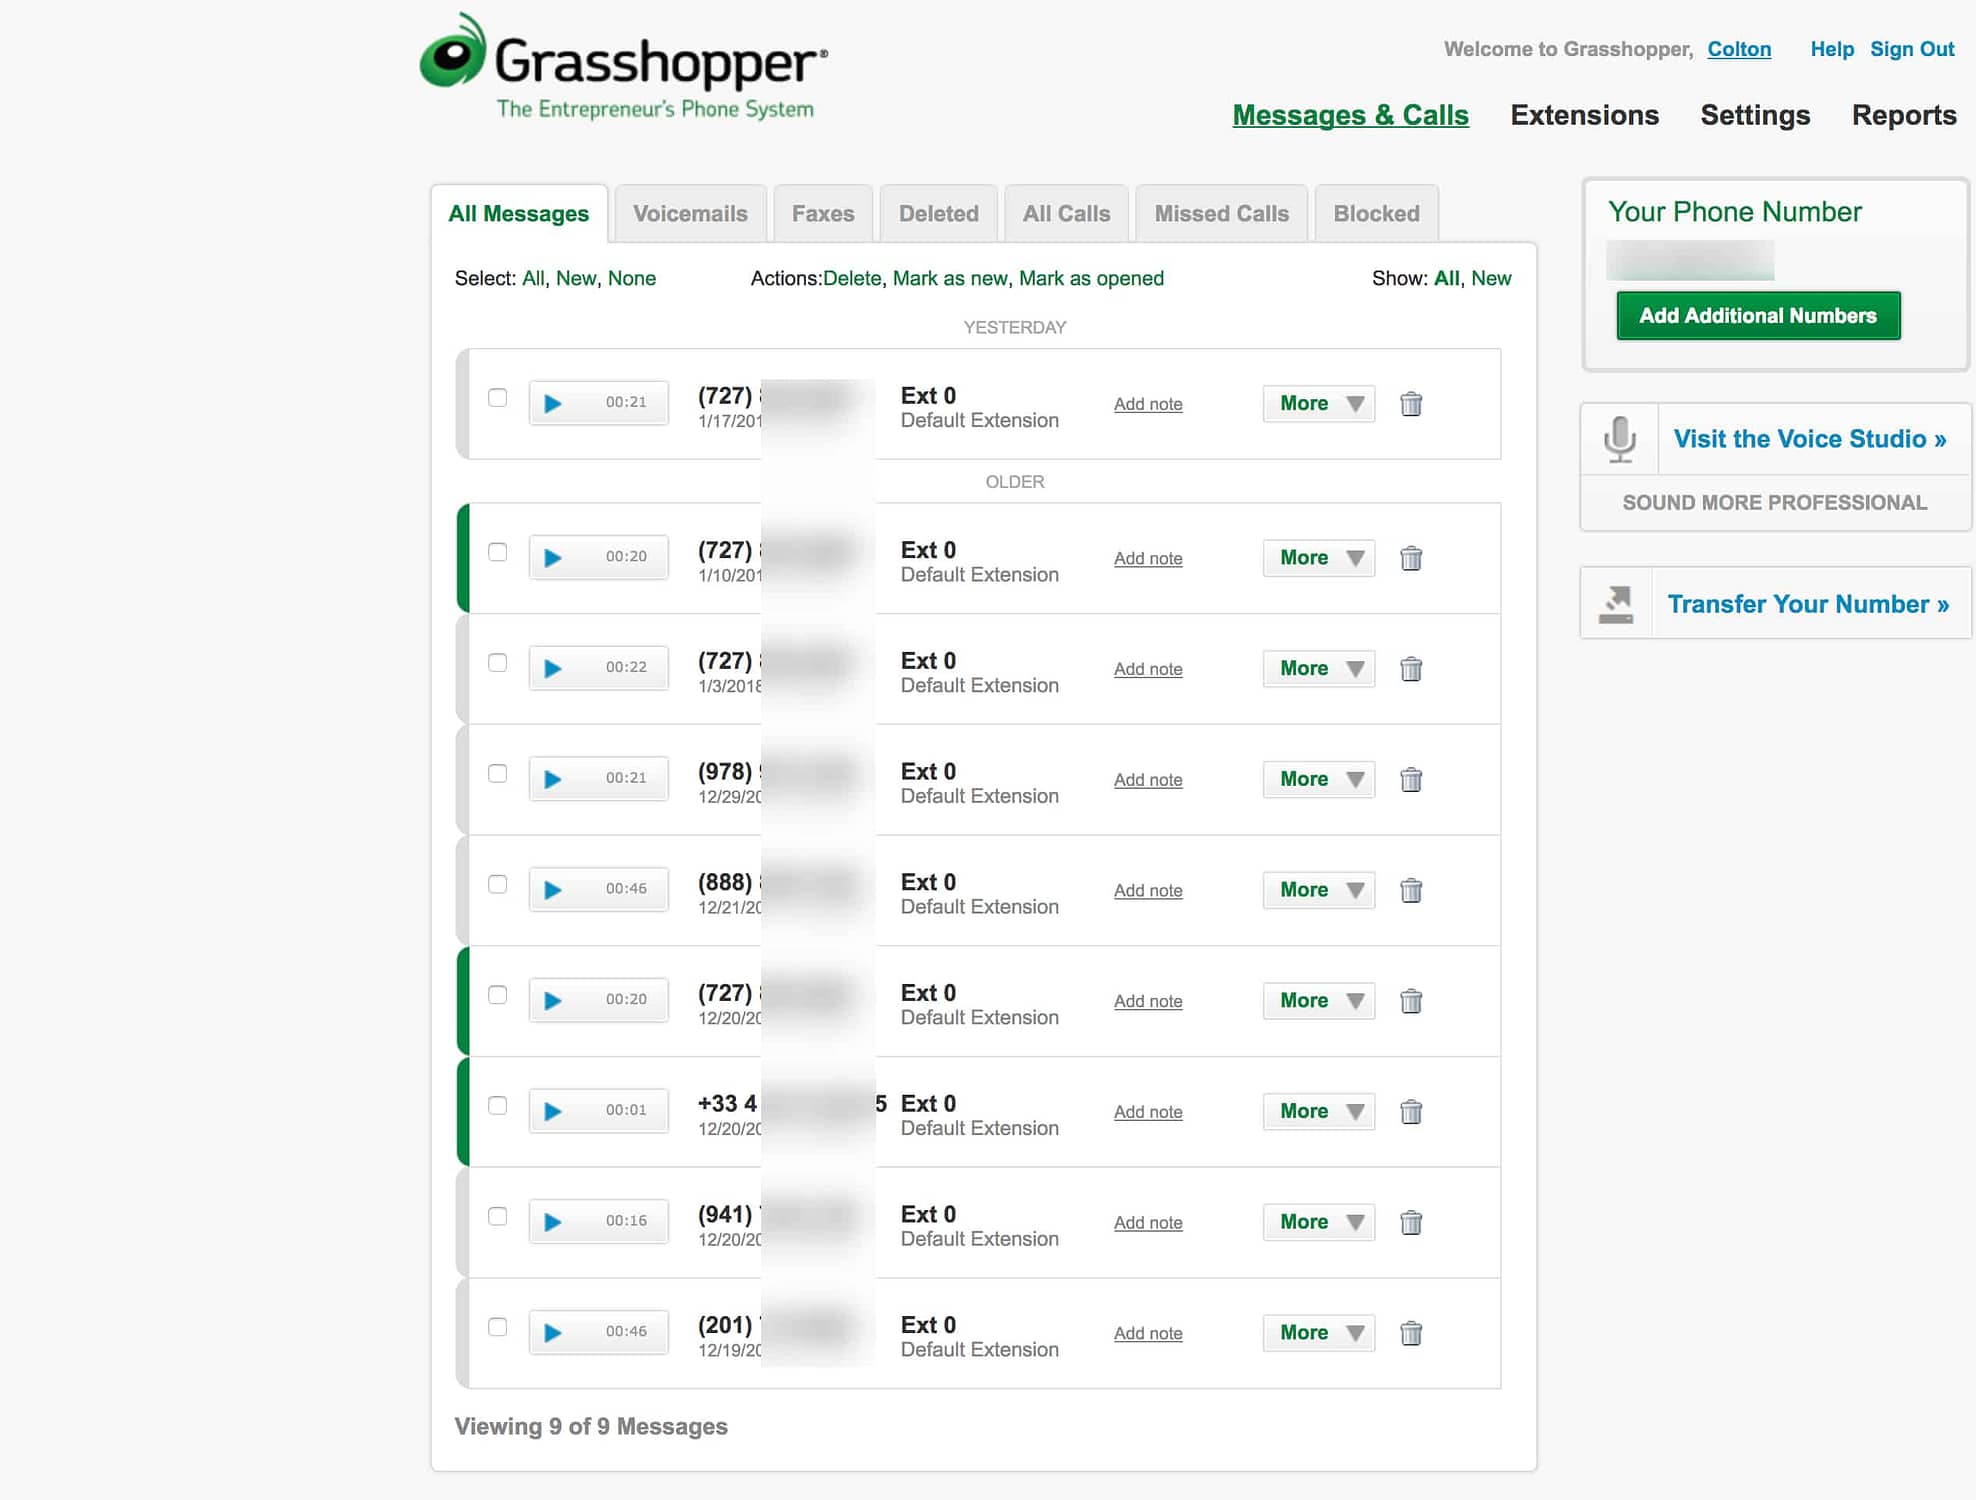 A view of the backend interface for Grasshopper's phone system (shown in the Chrome web browser).